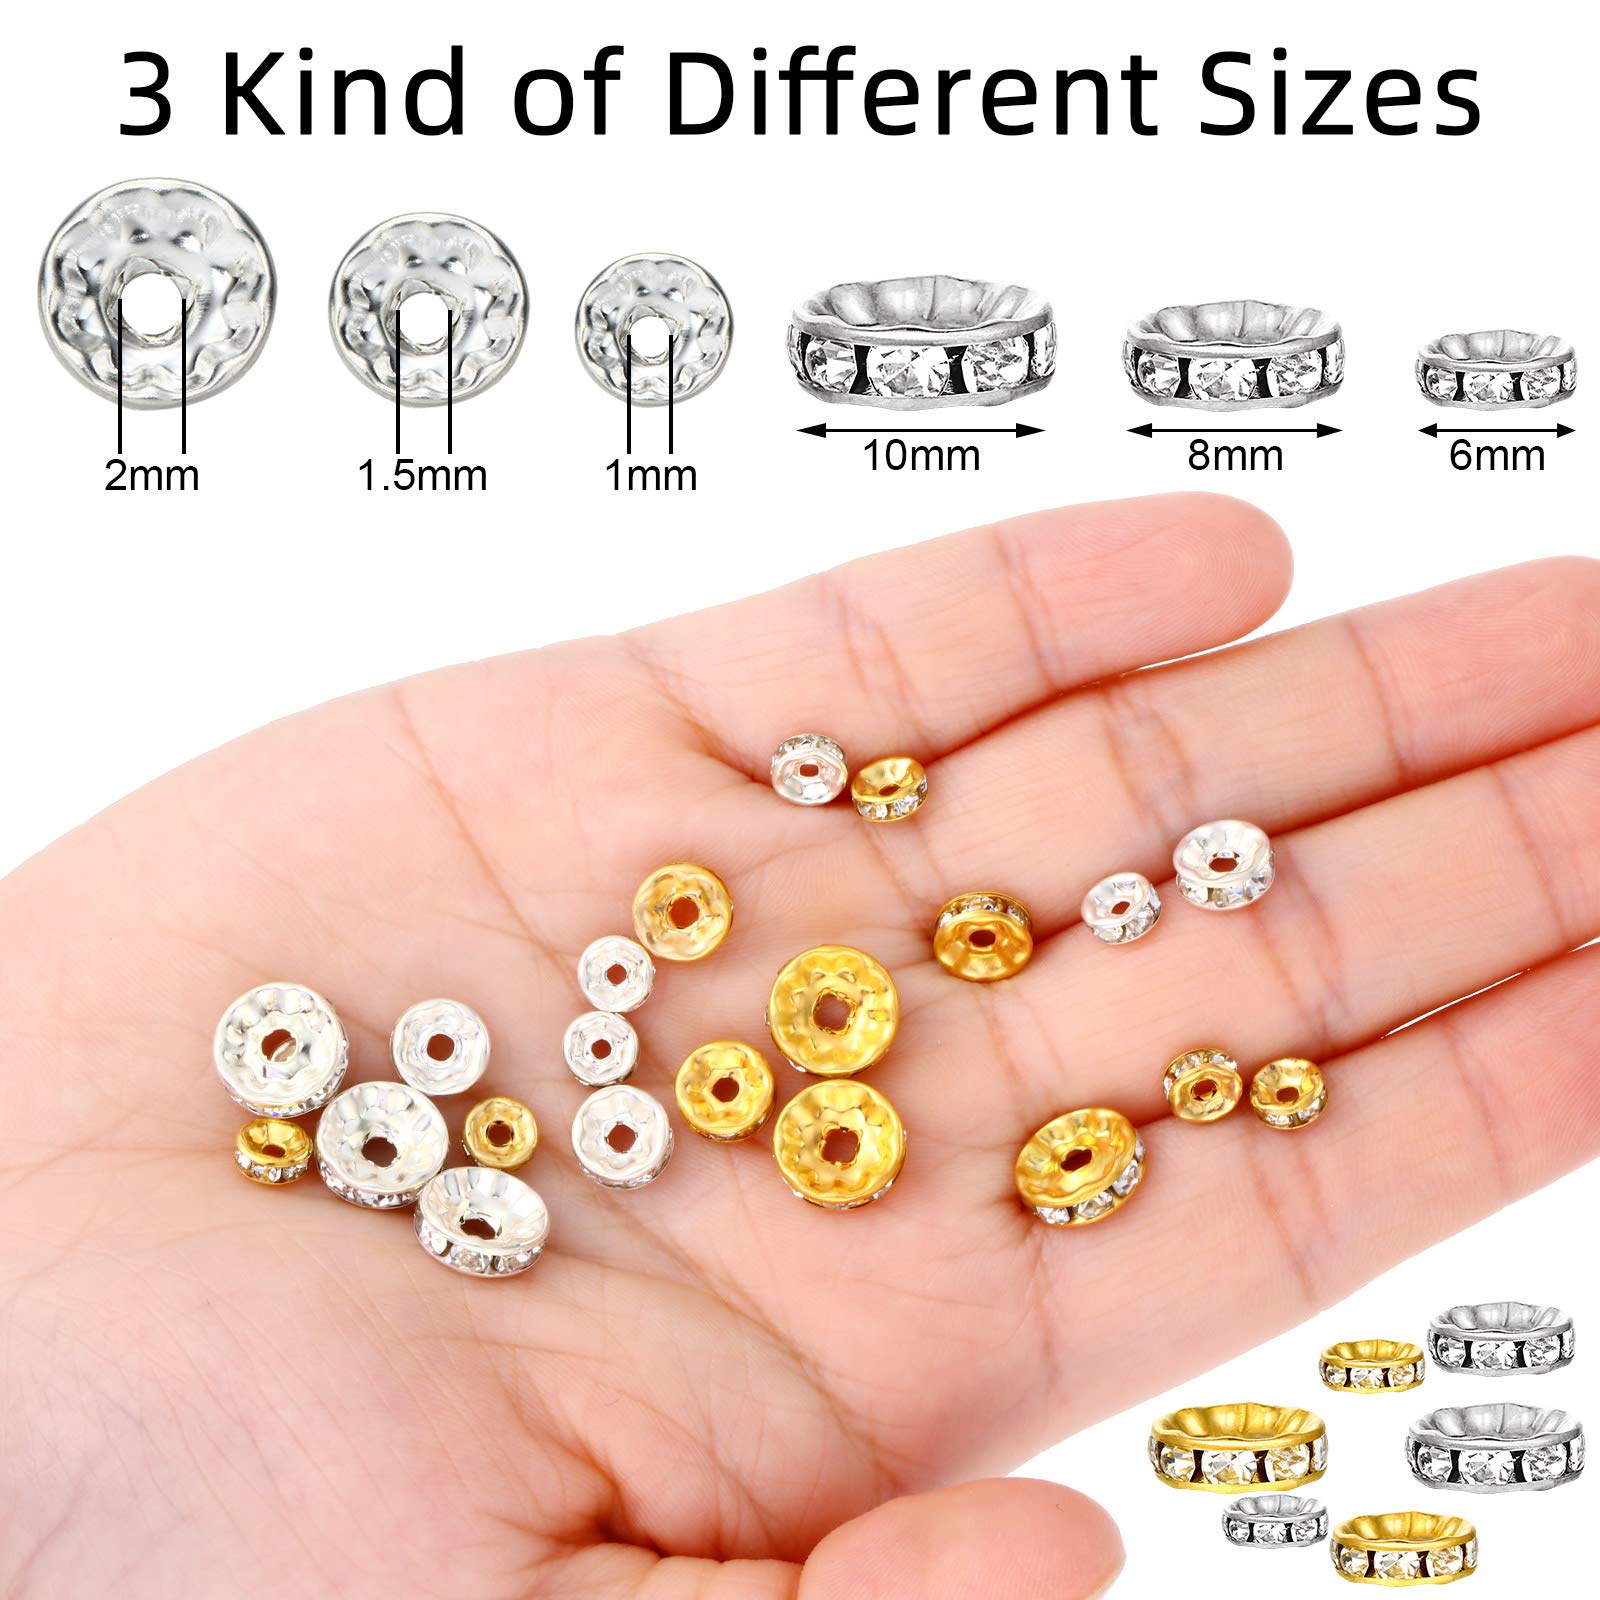 800 Pieces Round Rondelle Spacer Beads Crystal Rhinestone Loose Bead Rondelle Charm Beads 6 mm 8 mm 10 mm for Necklaces Bracelets Jewelry Making (Silver)